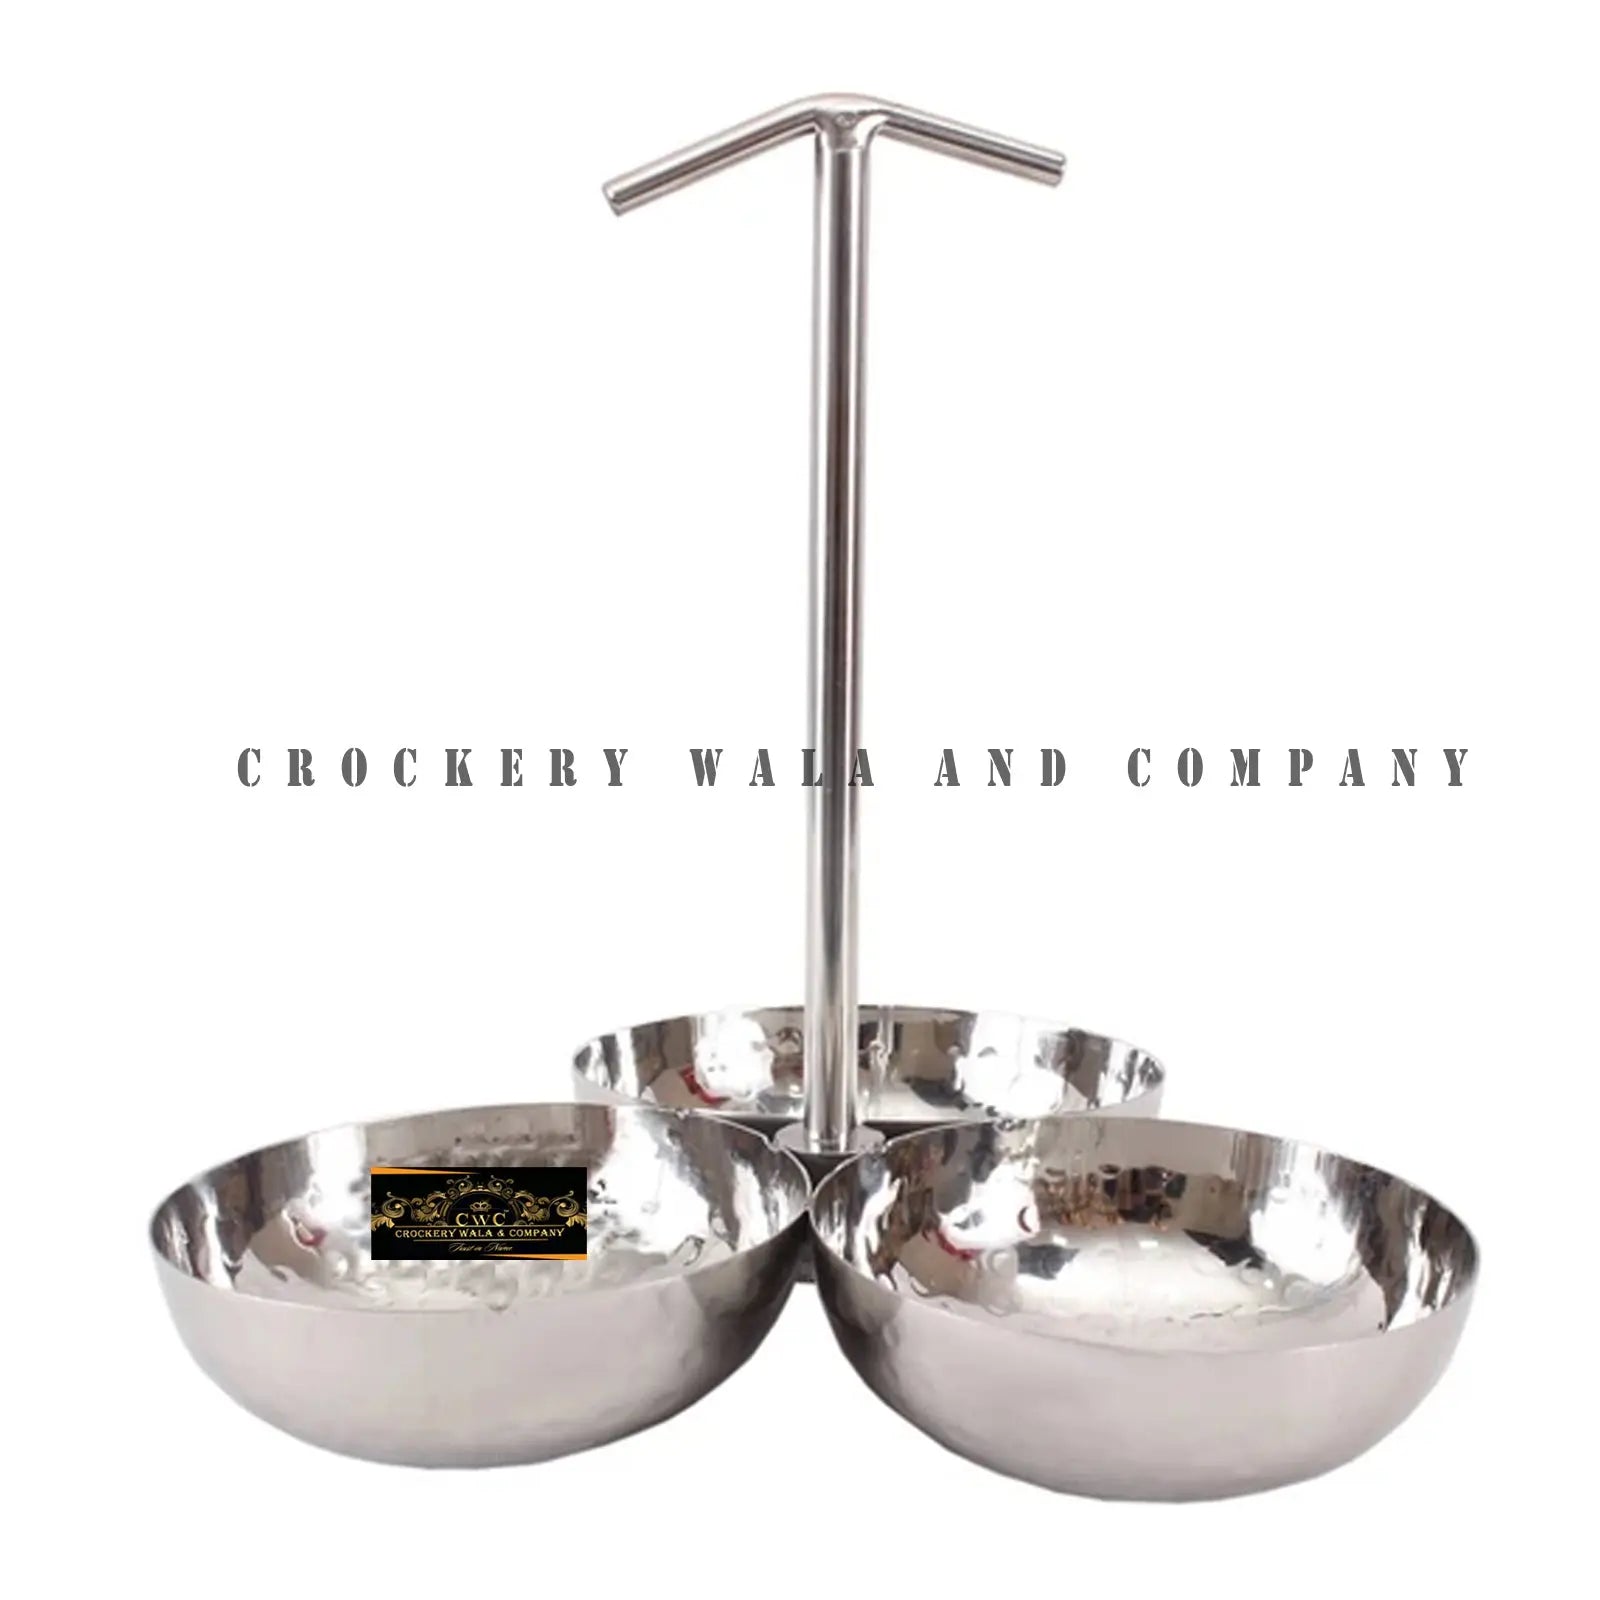 Crockery Wala And Company Stainless Steel Pickle Bowl Set Hammered Design Condimental Pickle Set With Handle 3 Containers - CROCKERY WALA AND COMPANY 